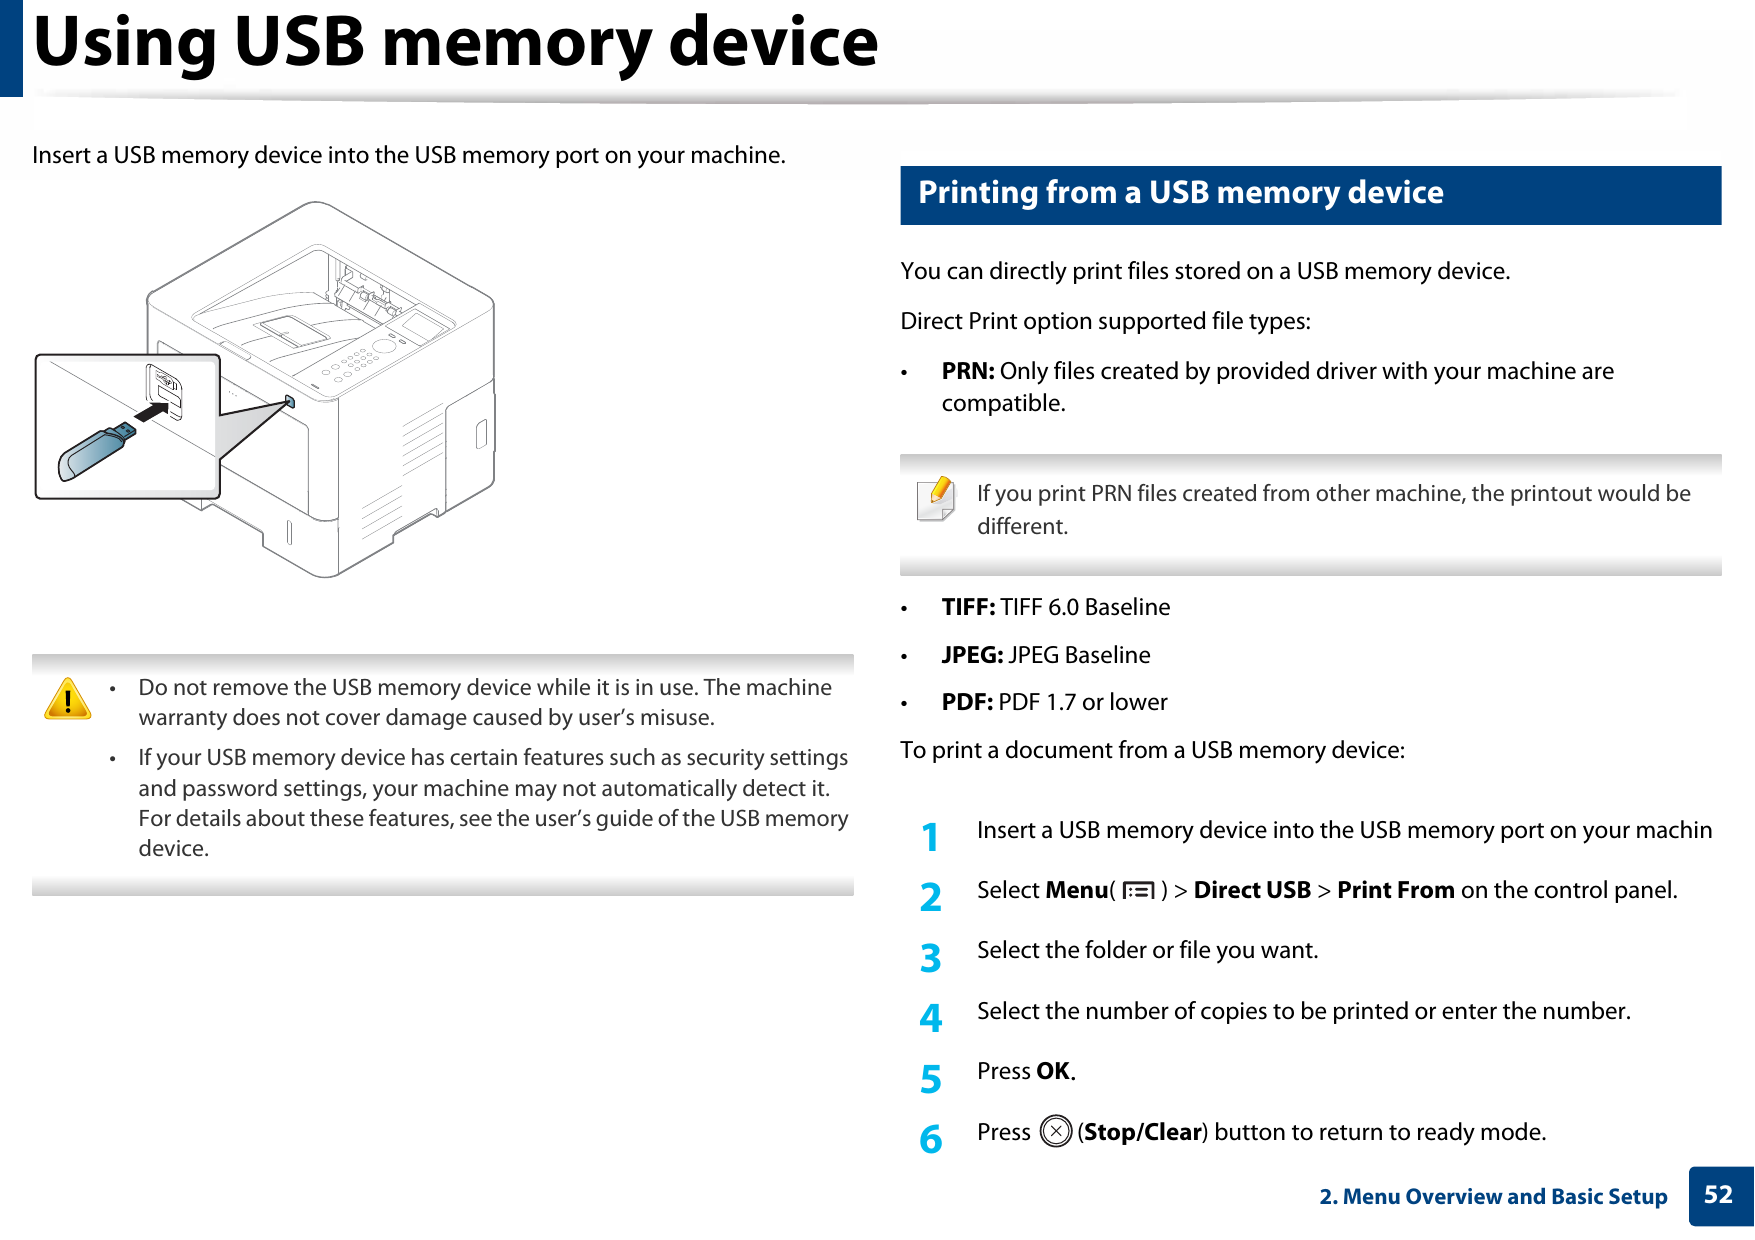 Using USB memory device522. Menu Overview and Basic SetupInsert a USB memory device into the USB memory port on your machine. • Do not remove the USB memory device while it is in use. The machine warranty does not cover damage caused by user’s misuse.• If your USB memory device has certain features such as security settings and password settings, your machine may not automatically detect it. For details about these features, see the user’s guide of the USB memory device. 14 Printing from a USB memory deviceYou can directly print files stored on a USB memory device.Direct Print option supported file types:•PRN: Only files created by provided driver with your machine are compatible. If you print PRN files created from other machine, the printout would be different. •TIFF: TIFF 6.0 Baseline•JPEG: JPEG Baseline•PDF: PDF 1.7 or lowerTo print a document from a USB memory device:1Insert a USB memory device into the USB memory port on your machin2  Select Menu() &gt; Direct USB &gt; Print From on the control panel.3  Select the folder or file you want.4  Select the number of copies to be printed or enter the number.5  Press OK.6  Press (Stop/Clear) button to return to ready mode.